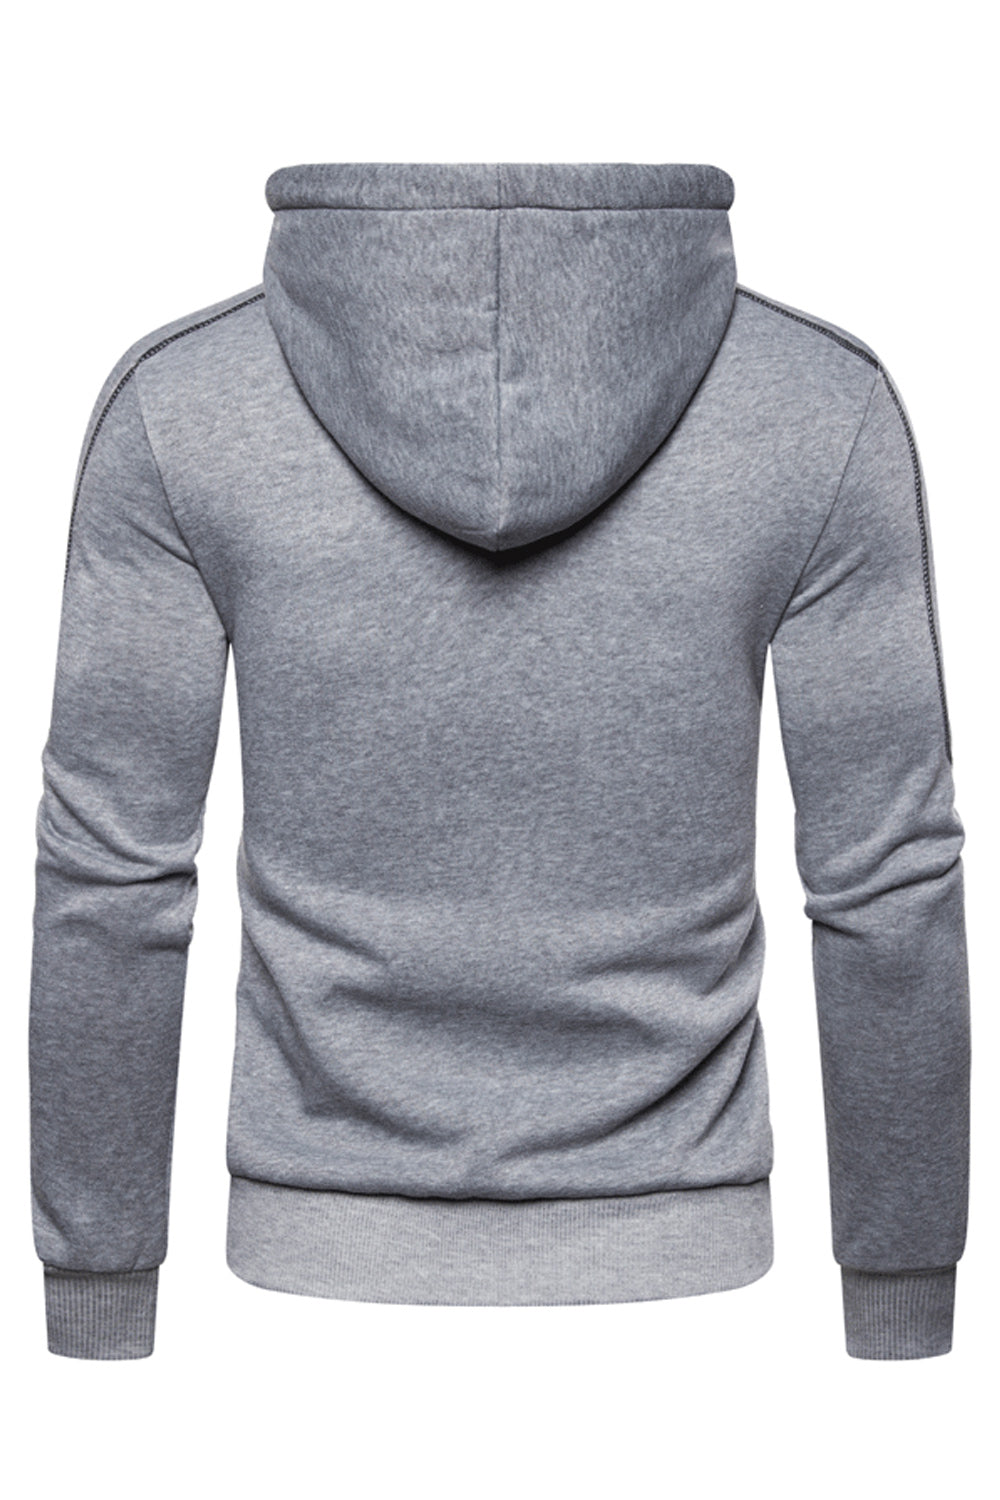 Men Awesome Solid Colored Pocket Styled Thick Long Sleeve Drawstring Zipper Closure Winter Casual Hoodie - MH84260